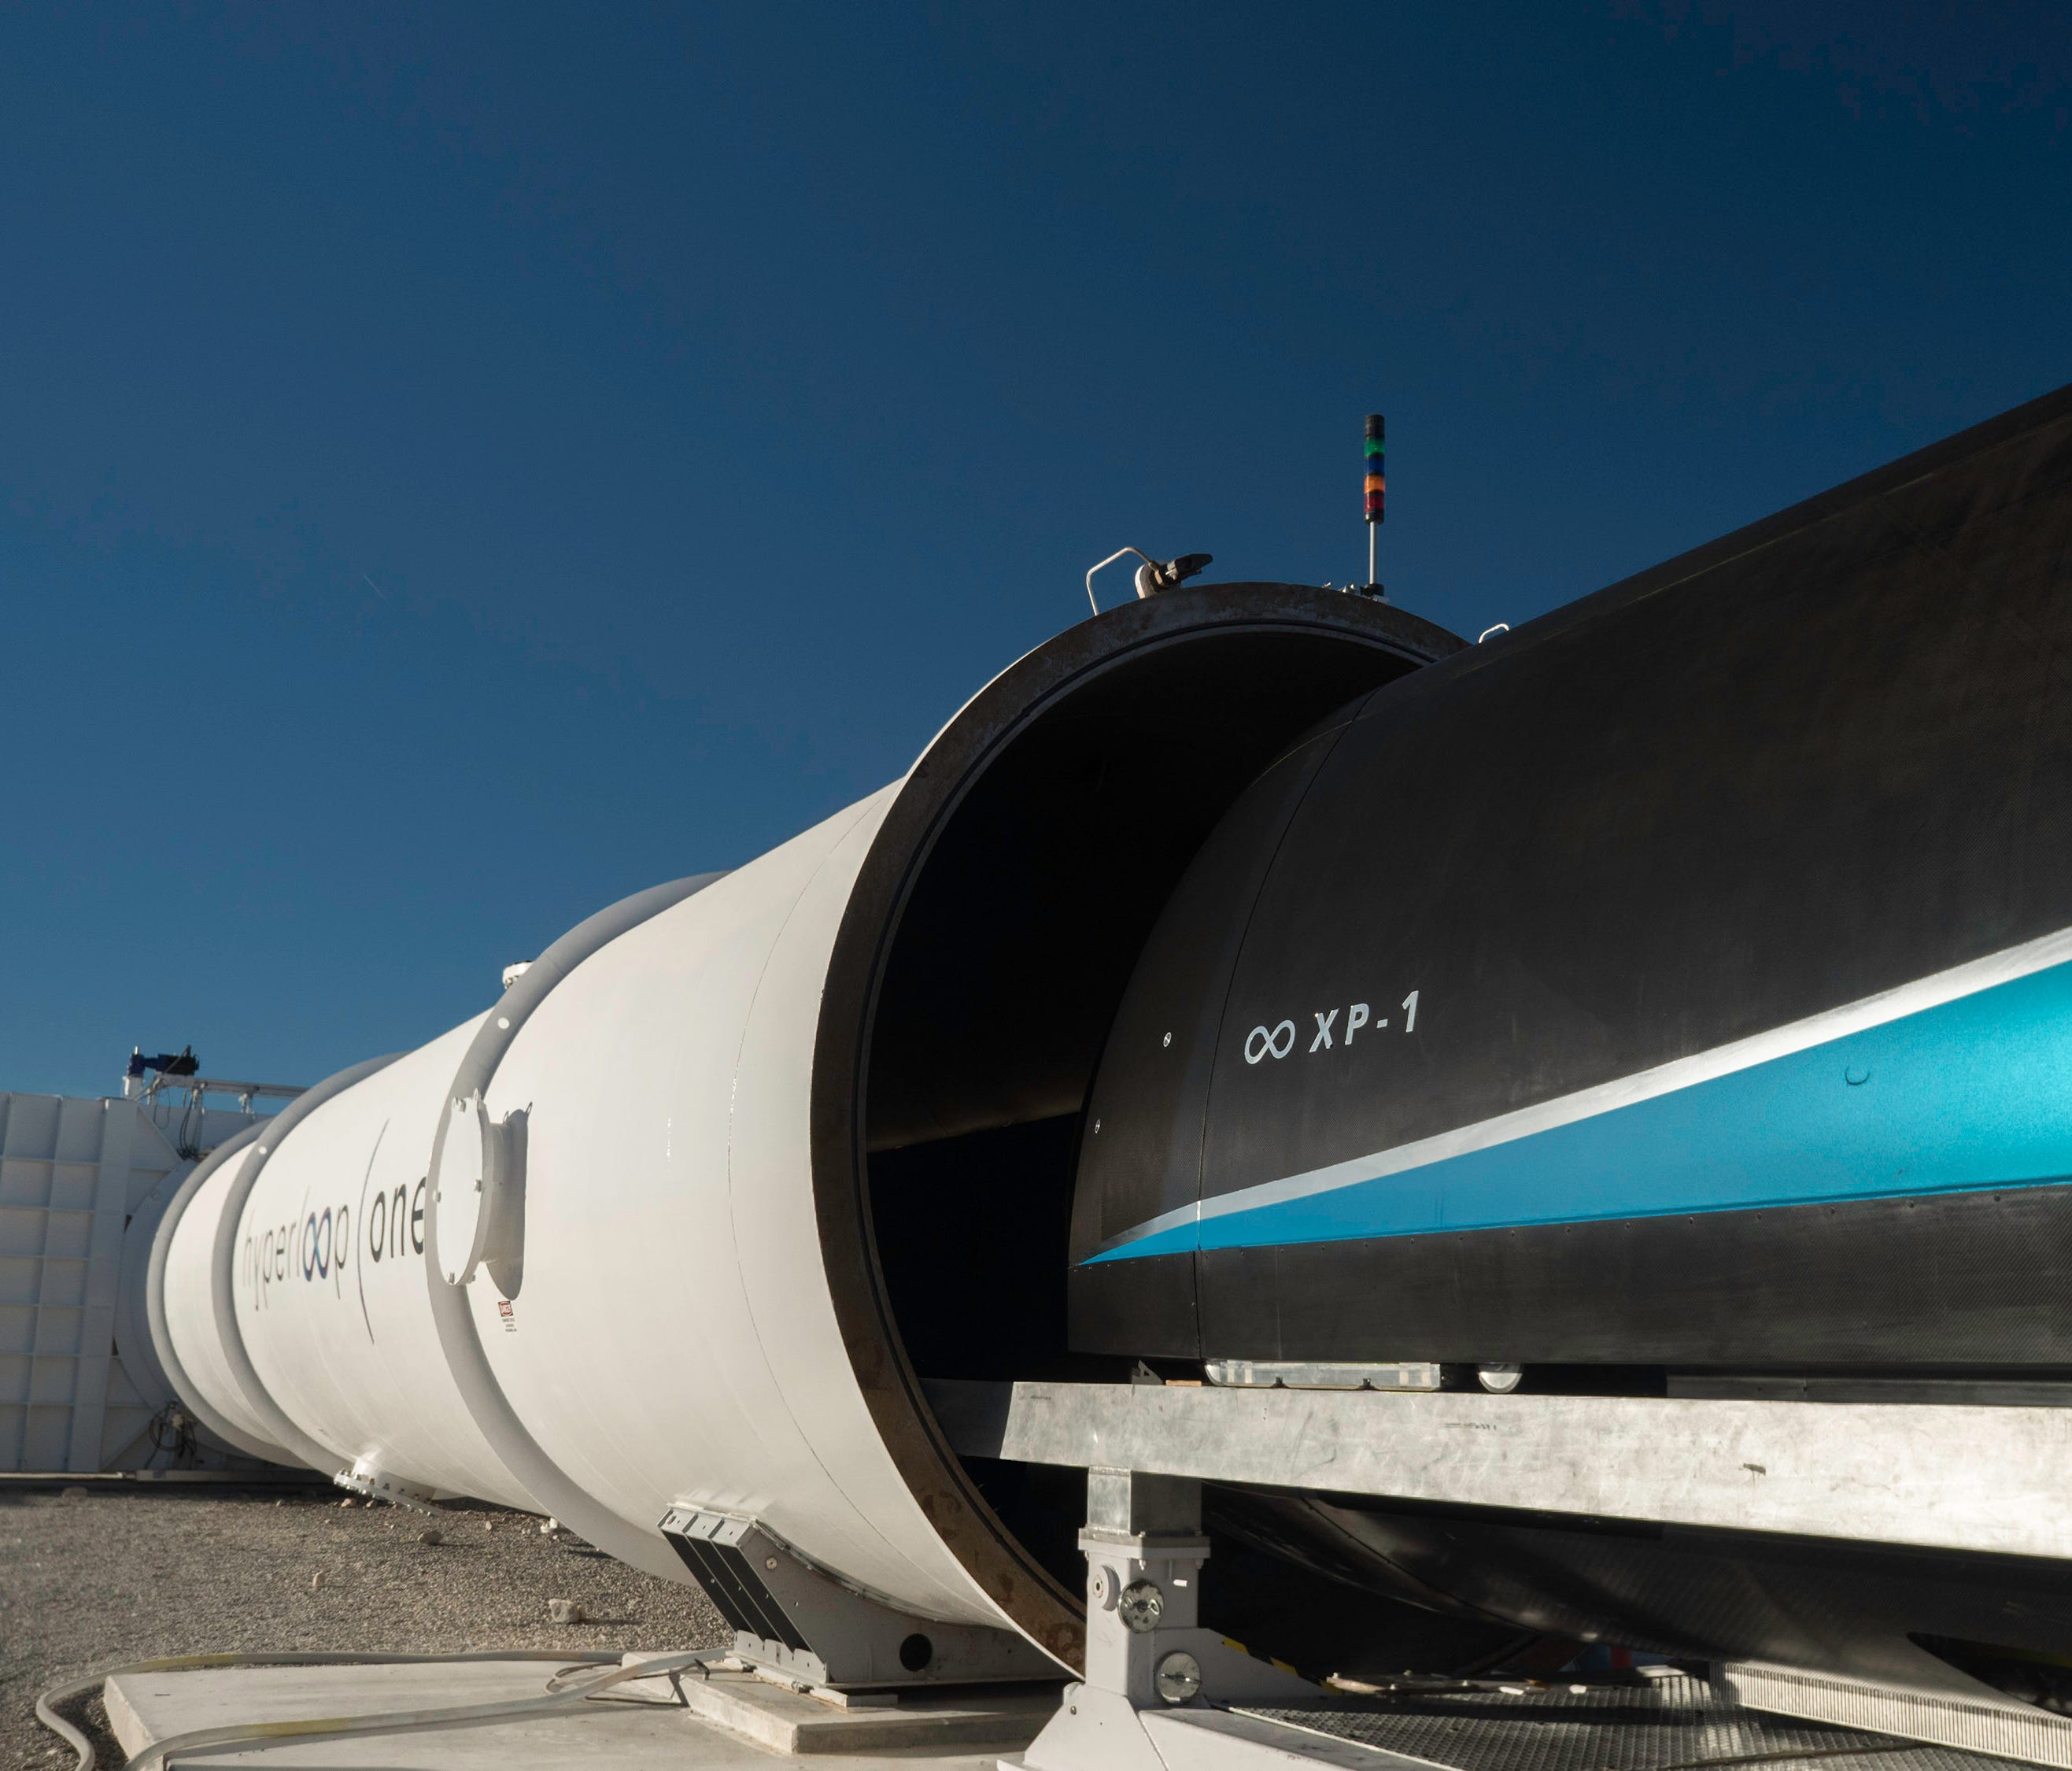 Virgin Hyperloop One has a new chairman, Richard Branson, and has just raised $50 million in new funding.